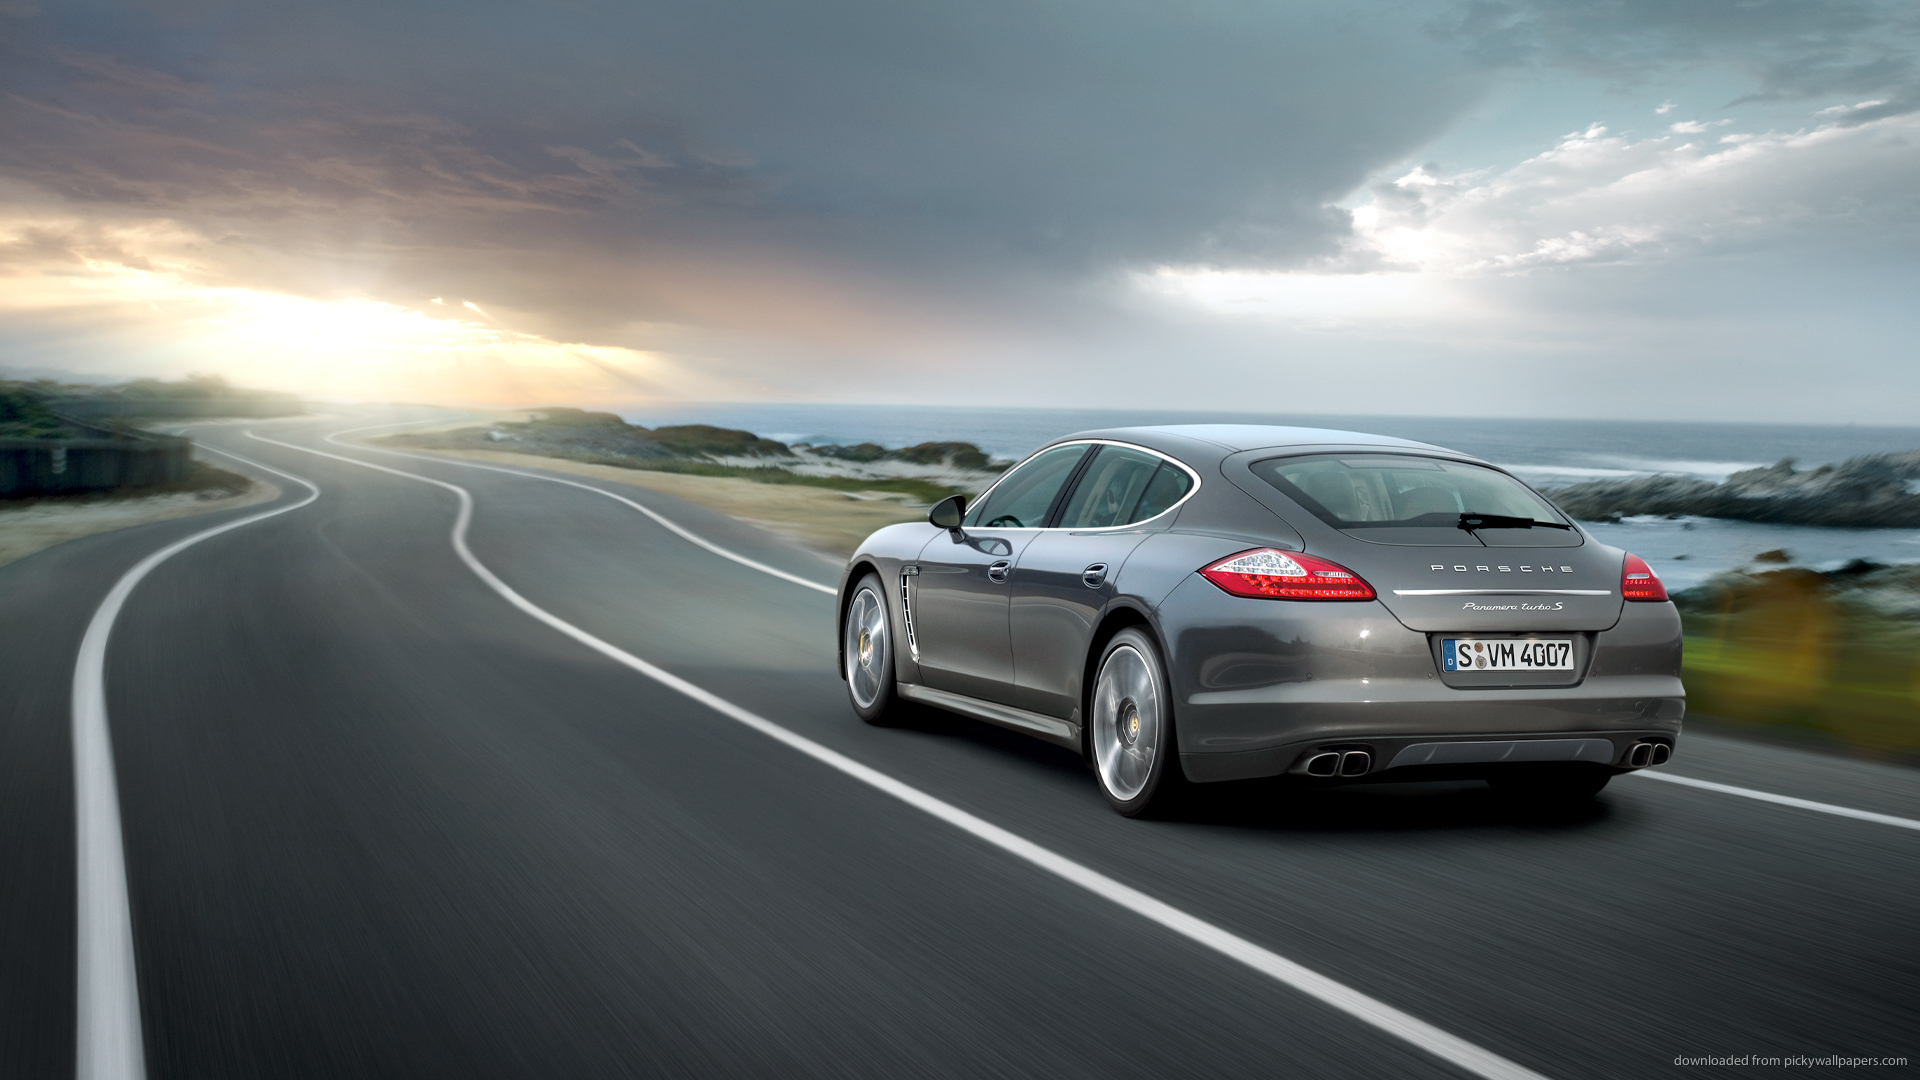 Porsche Panamera Turbo S On A Shore Screensaver For Kindle3 And Dx